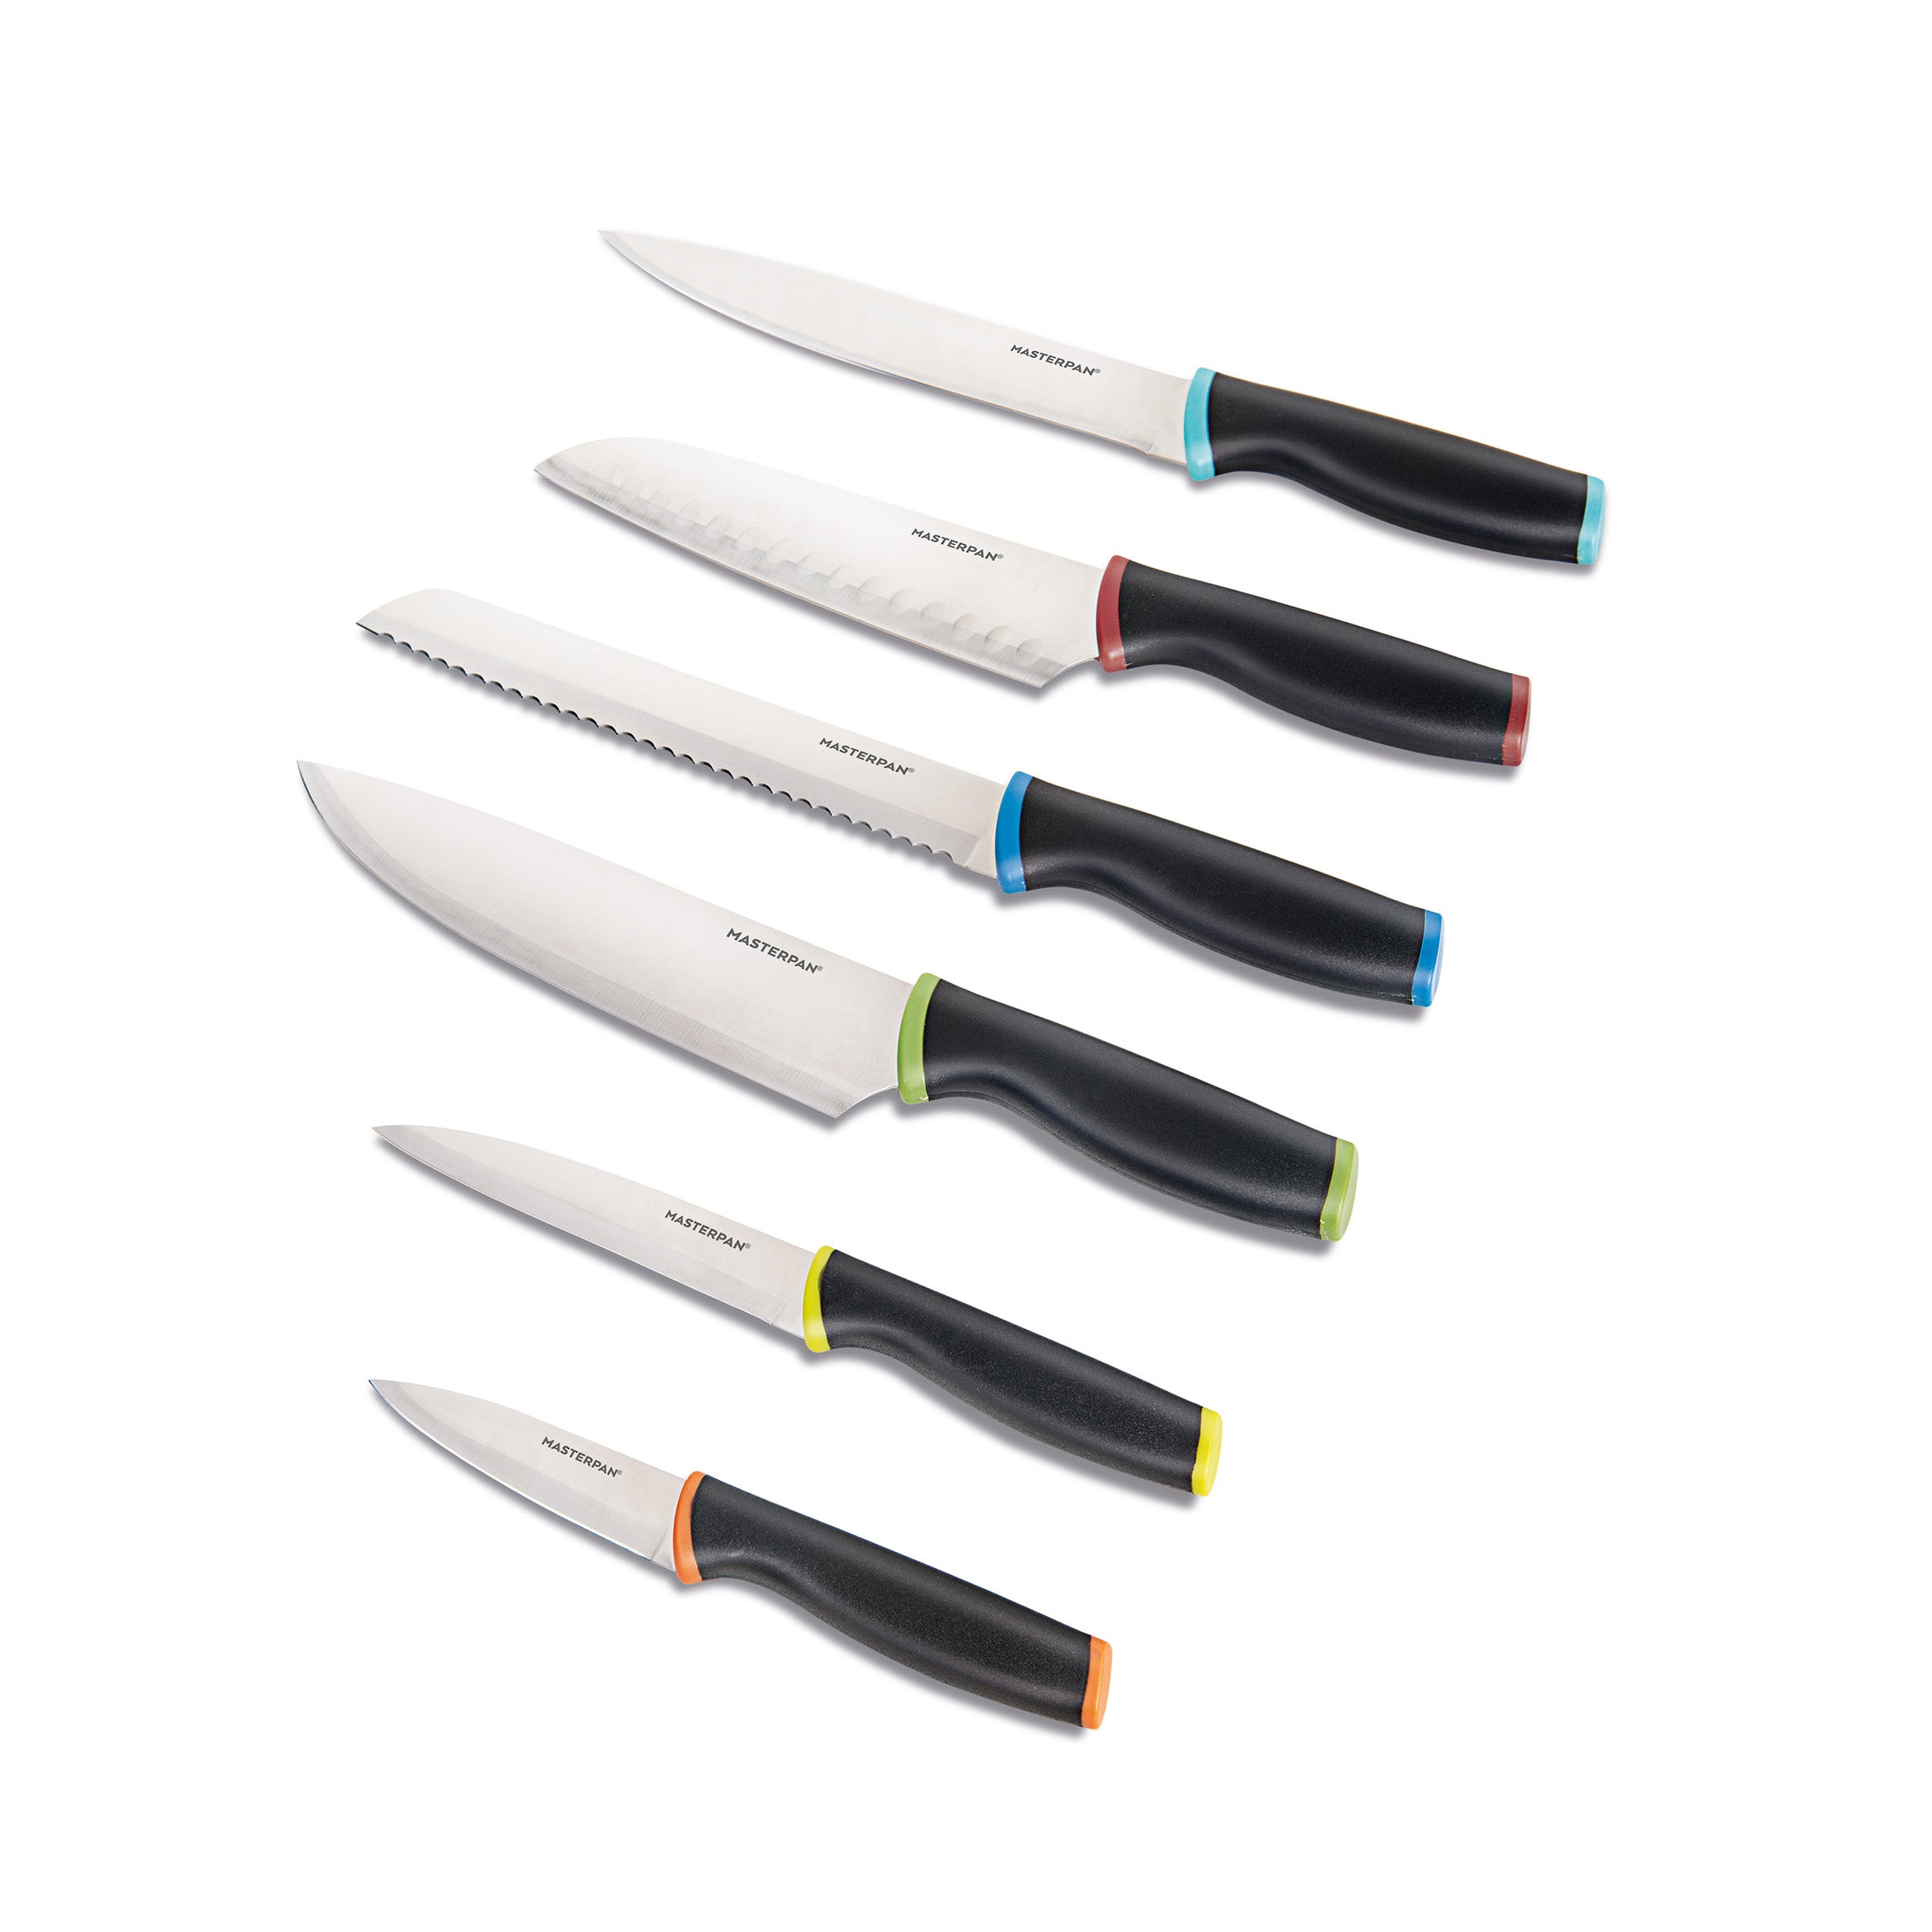 12-PC KNIFE SET WITH PROTECTIVE BLADE COVERS, STAINLESS STEEL BLADE AND NON-SLIP HANDLE